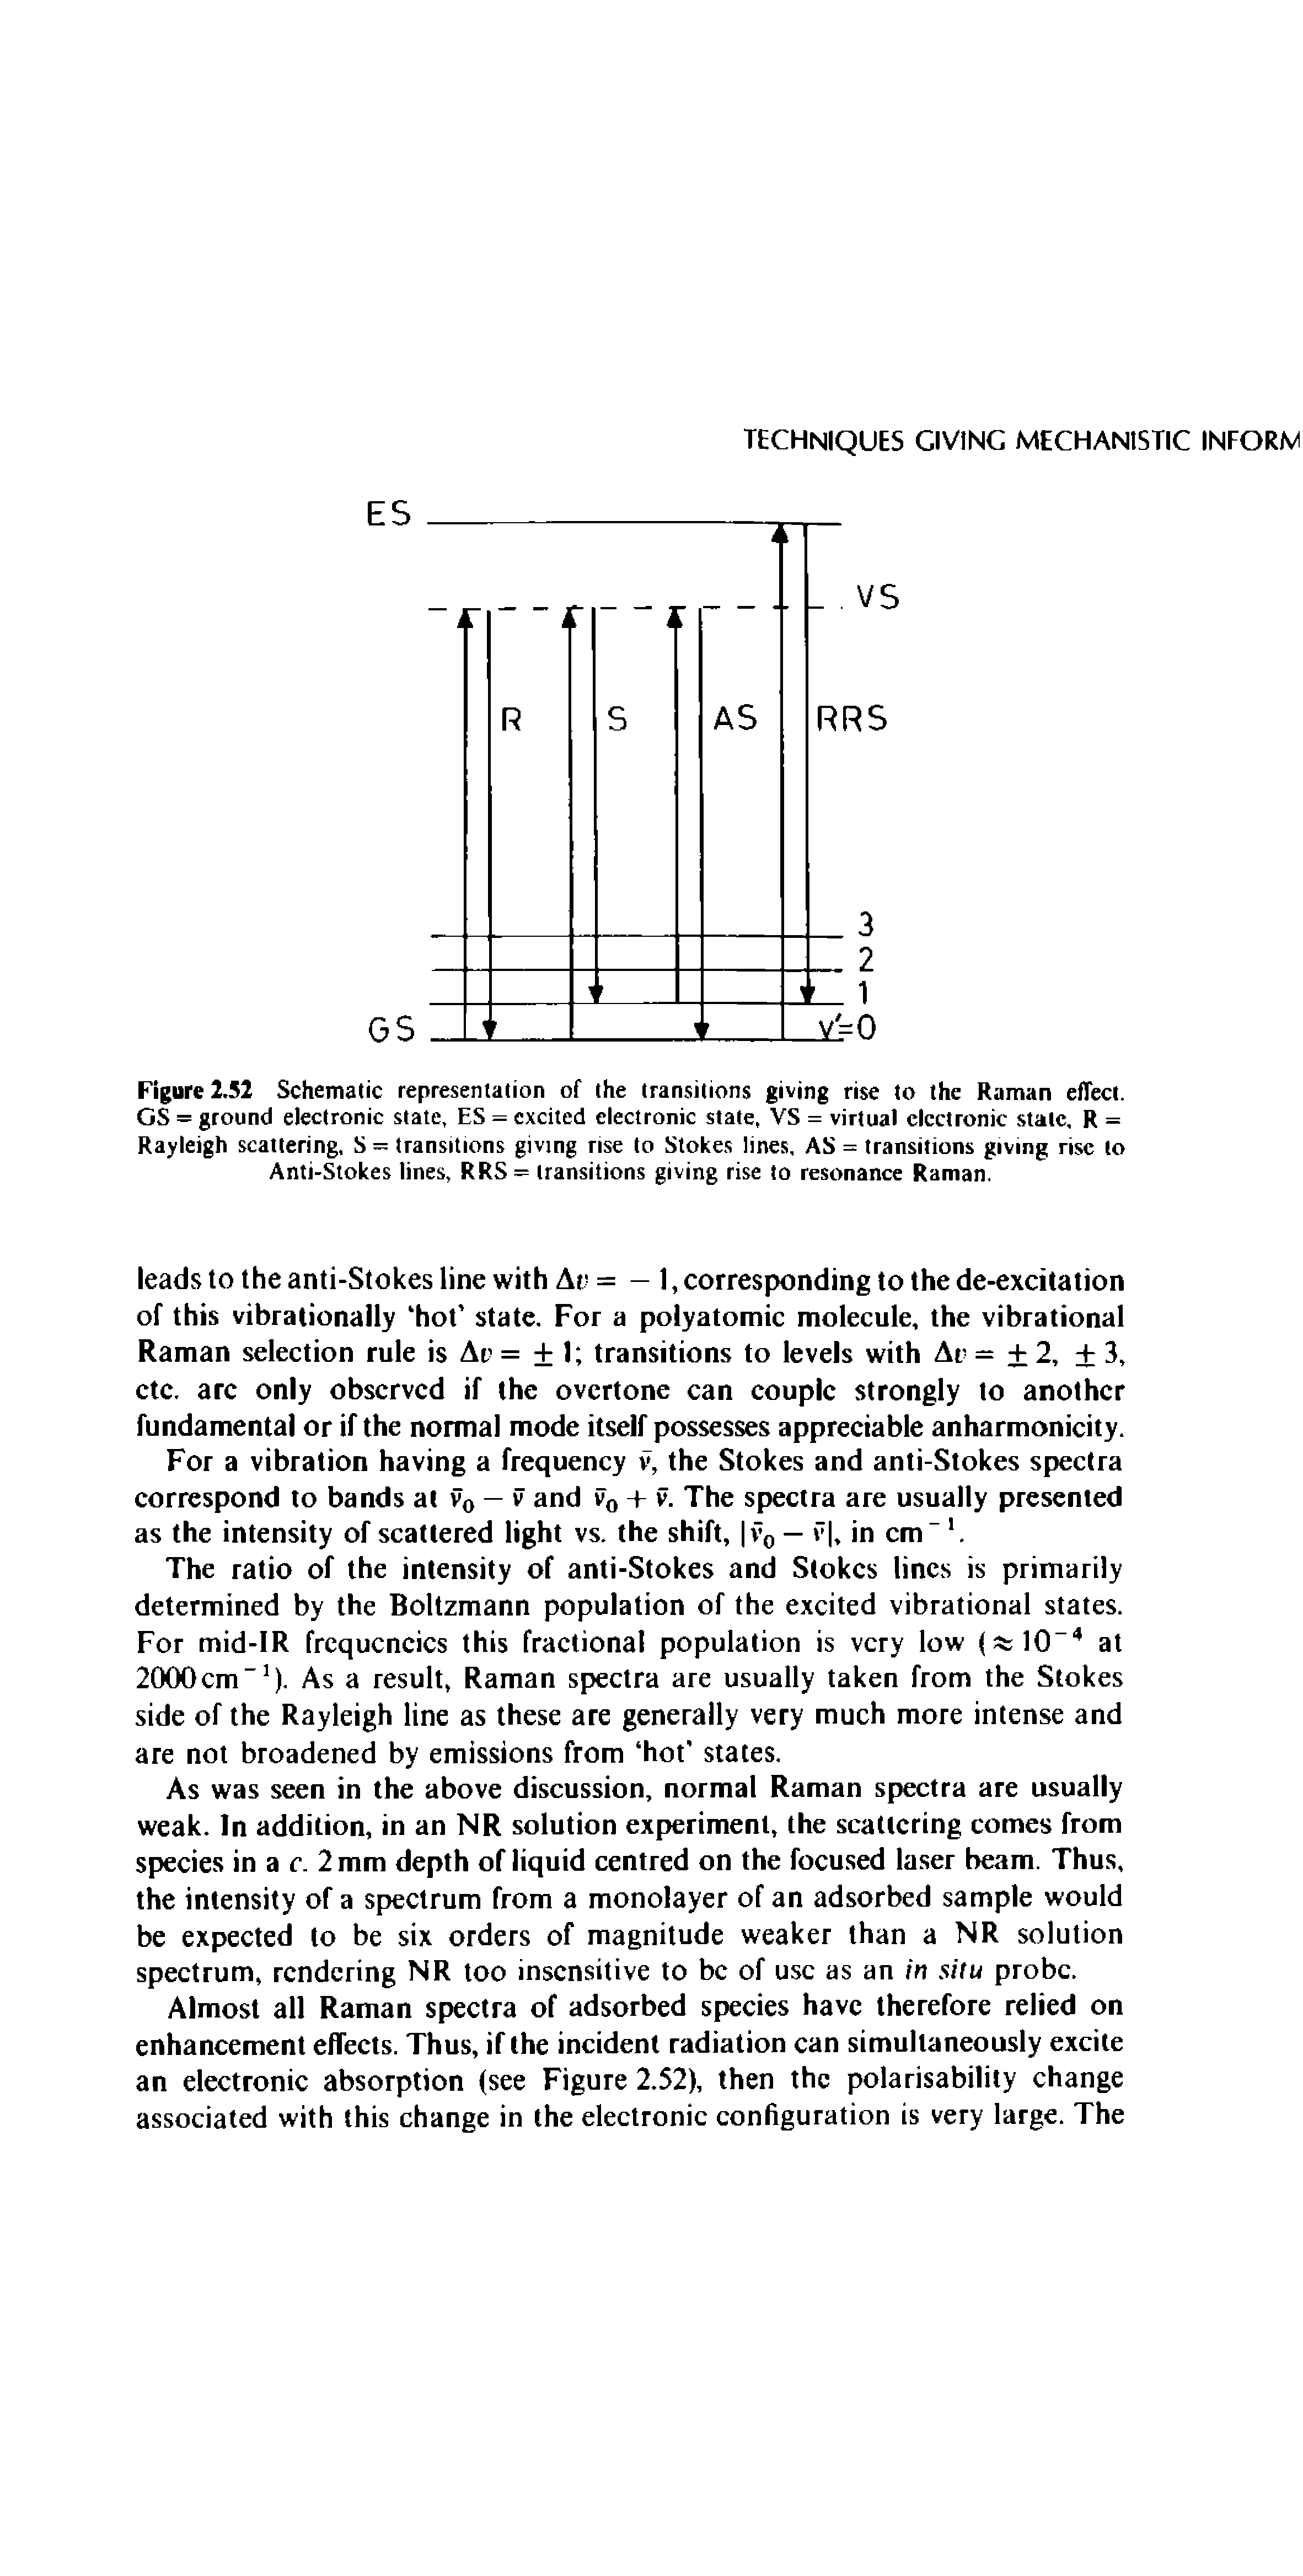 Figure 2.52 Schematic representation of the transitions giving rise to the Raman effect. GS = ground electronic state, ES = excited electronic state, VS = virtual electronic stale, R = Rayleigh scattering, S = transitions giving rise to Stokes lines, AS = transitions giving rise to Anti-Stokes lines, RRS = transitions giving rise to resonance Raman.